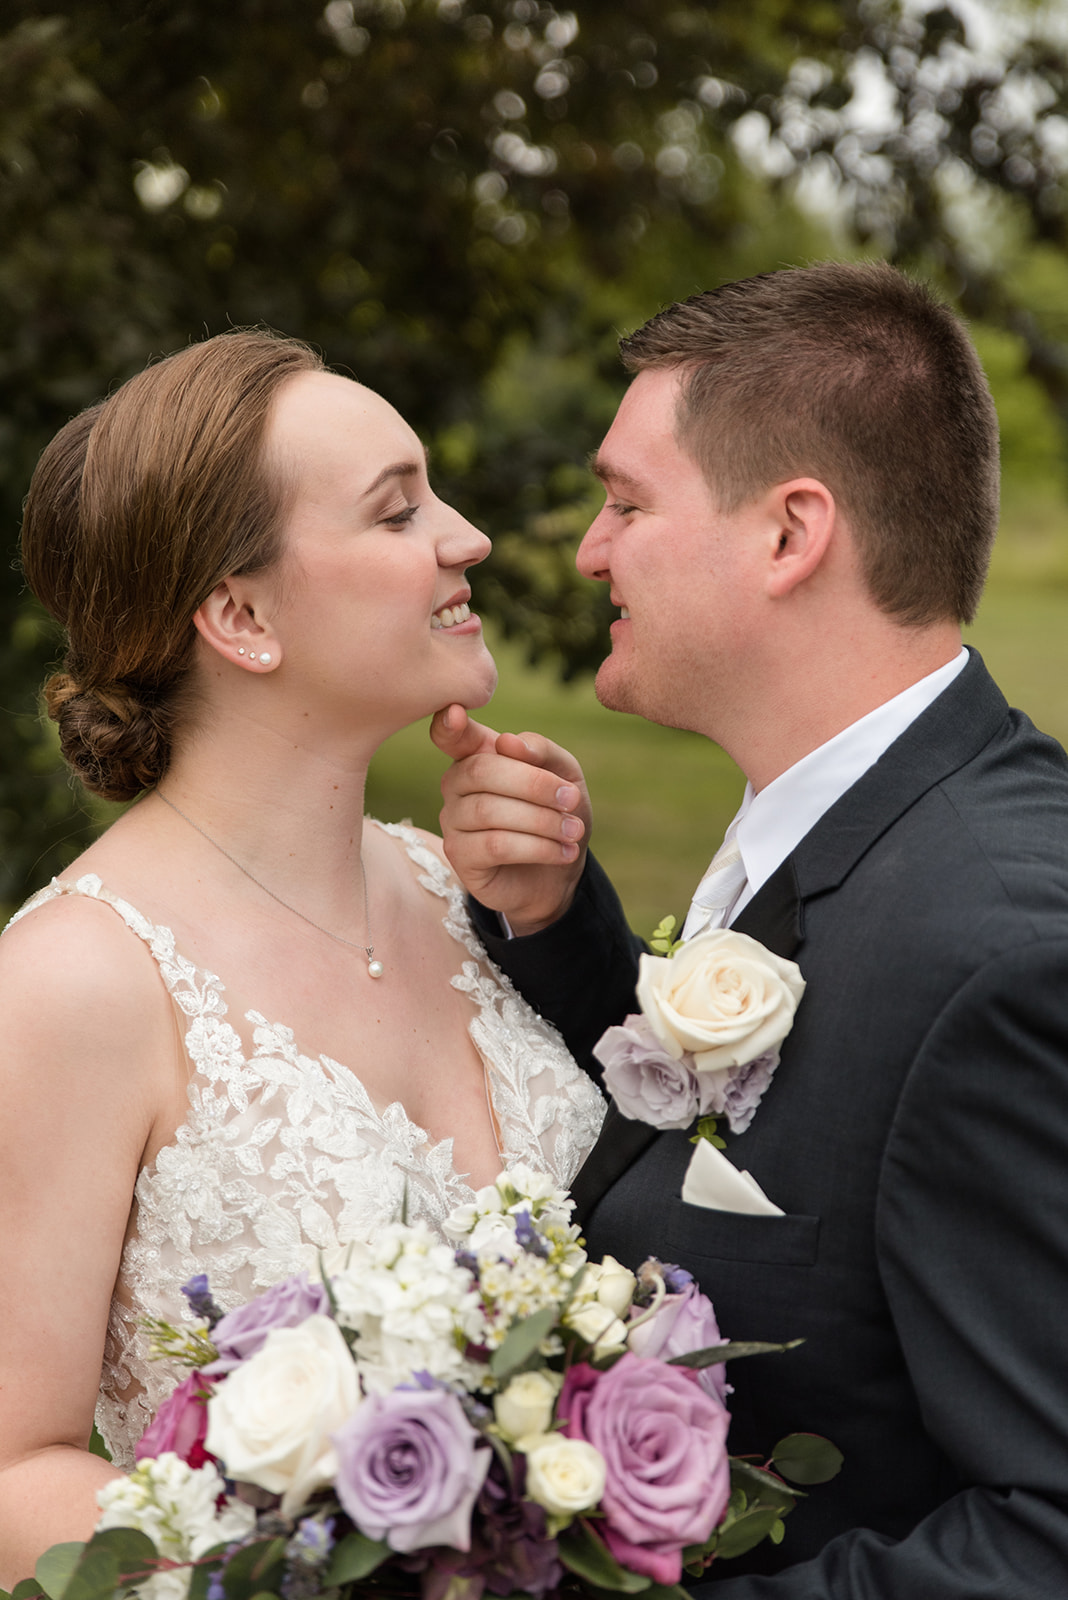 Bride and groom share a quiet, unscripted moment together during their wedding portraits in Eau Claire, Wisconsin